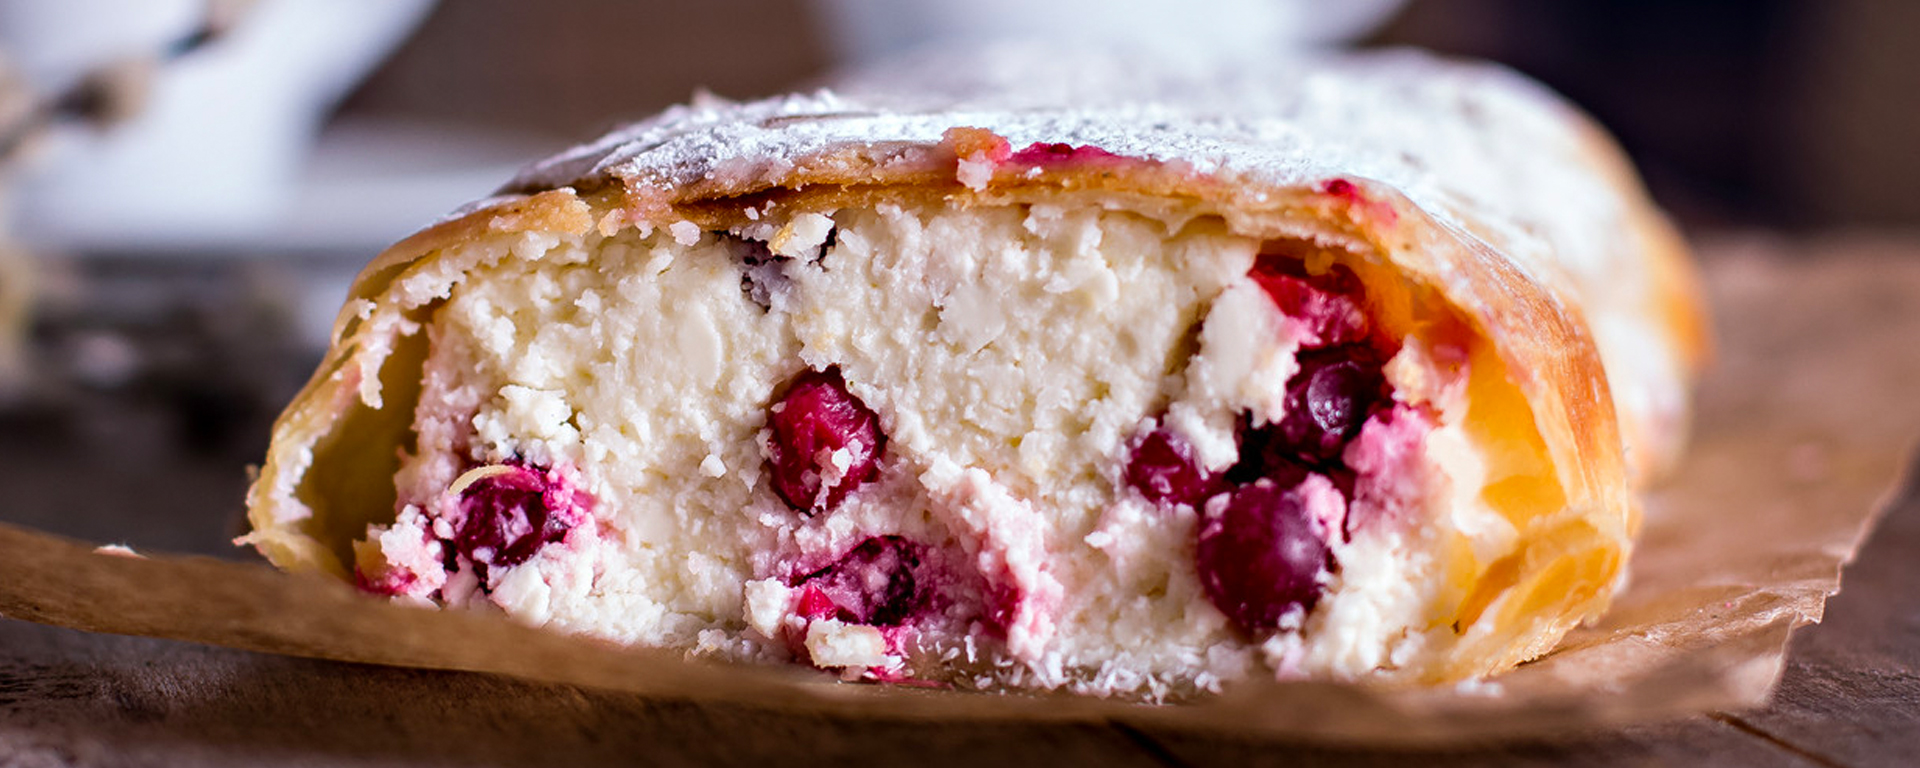 Photo for - Cranberry Strudel with Mascarpone Cheese